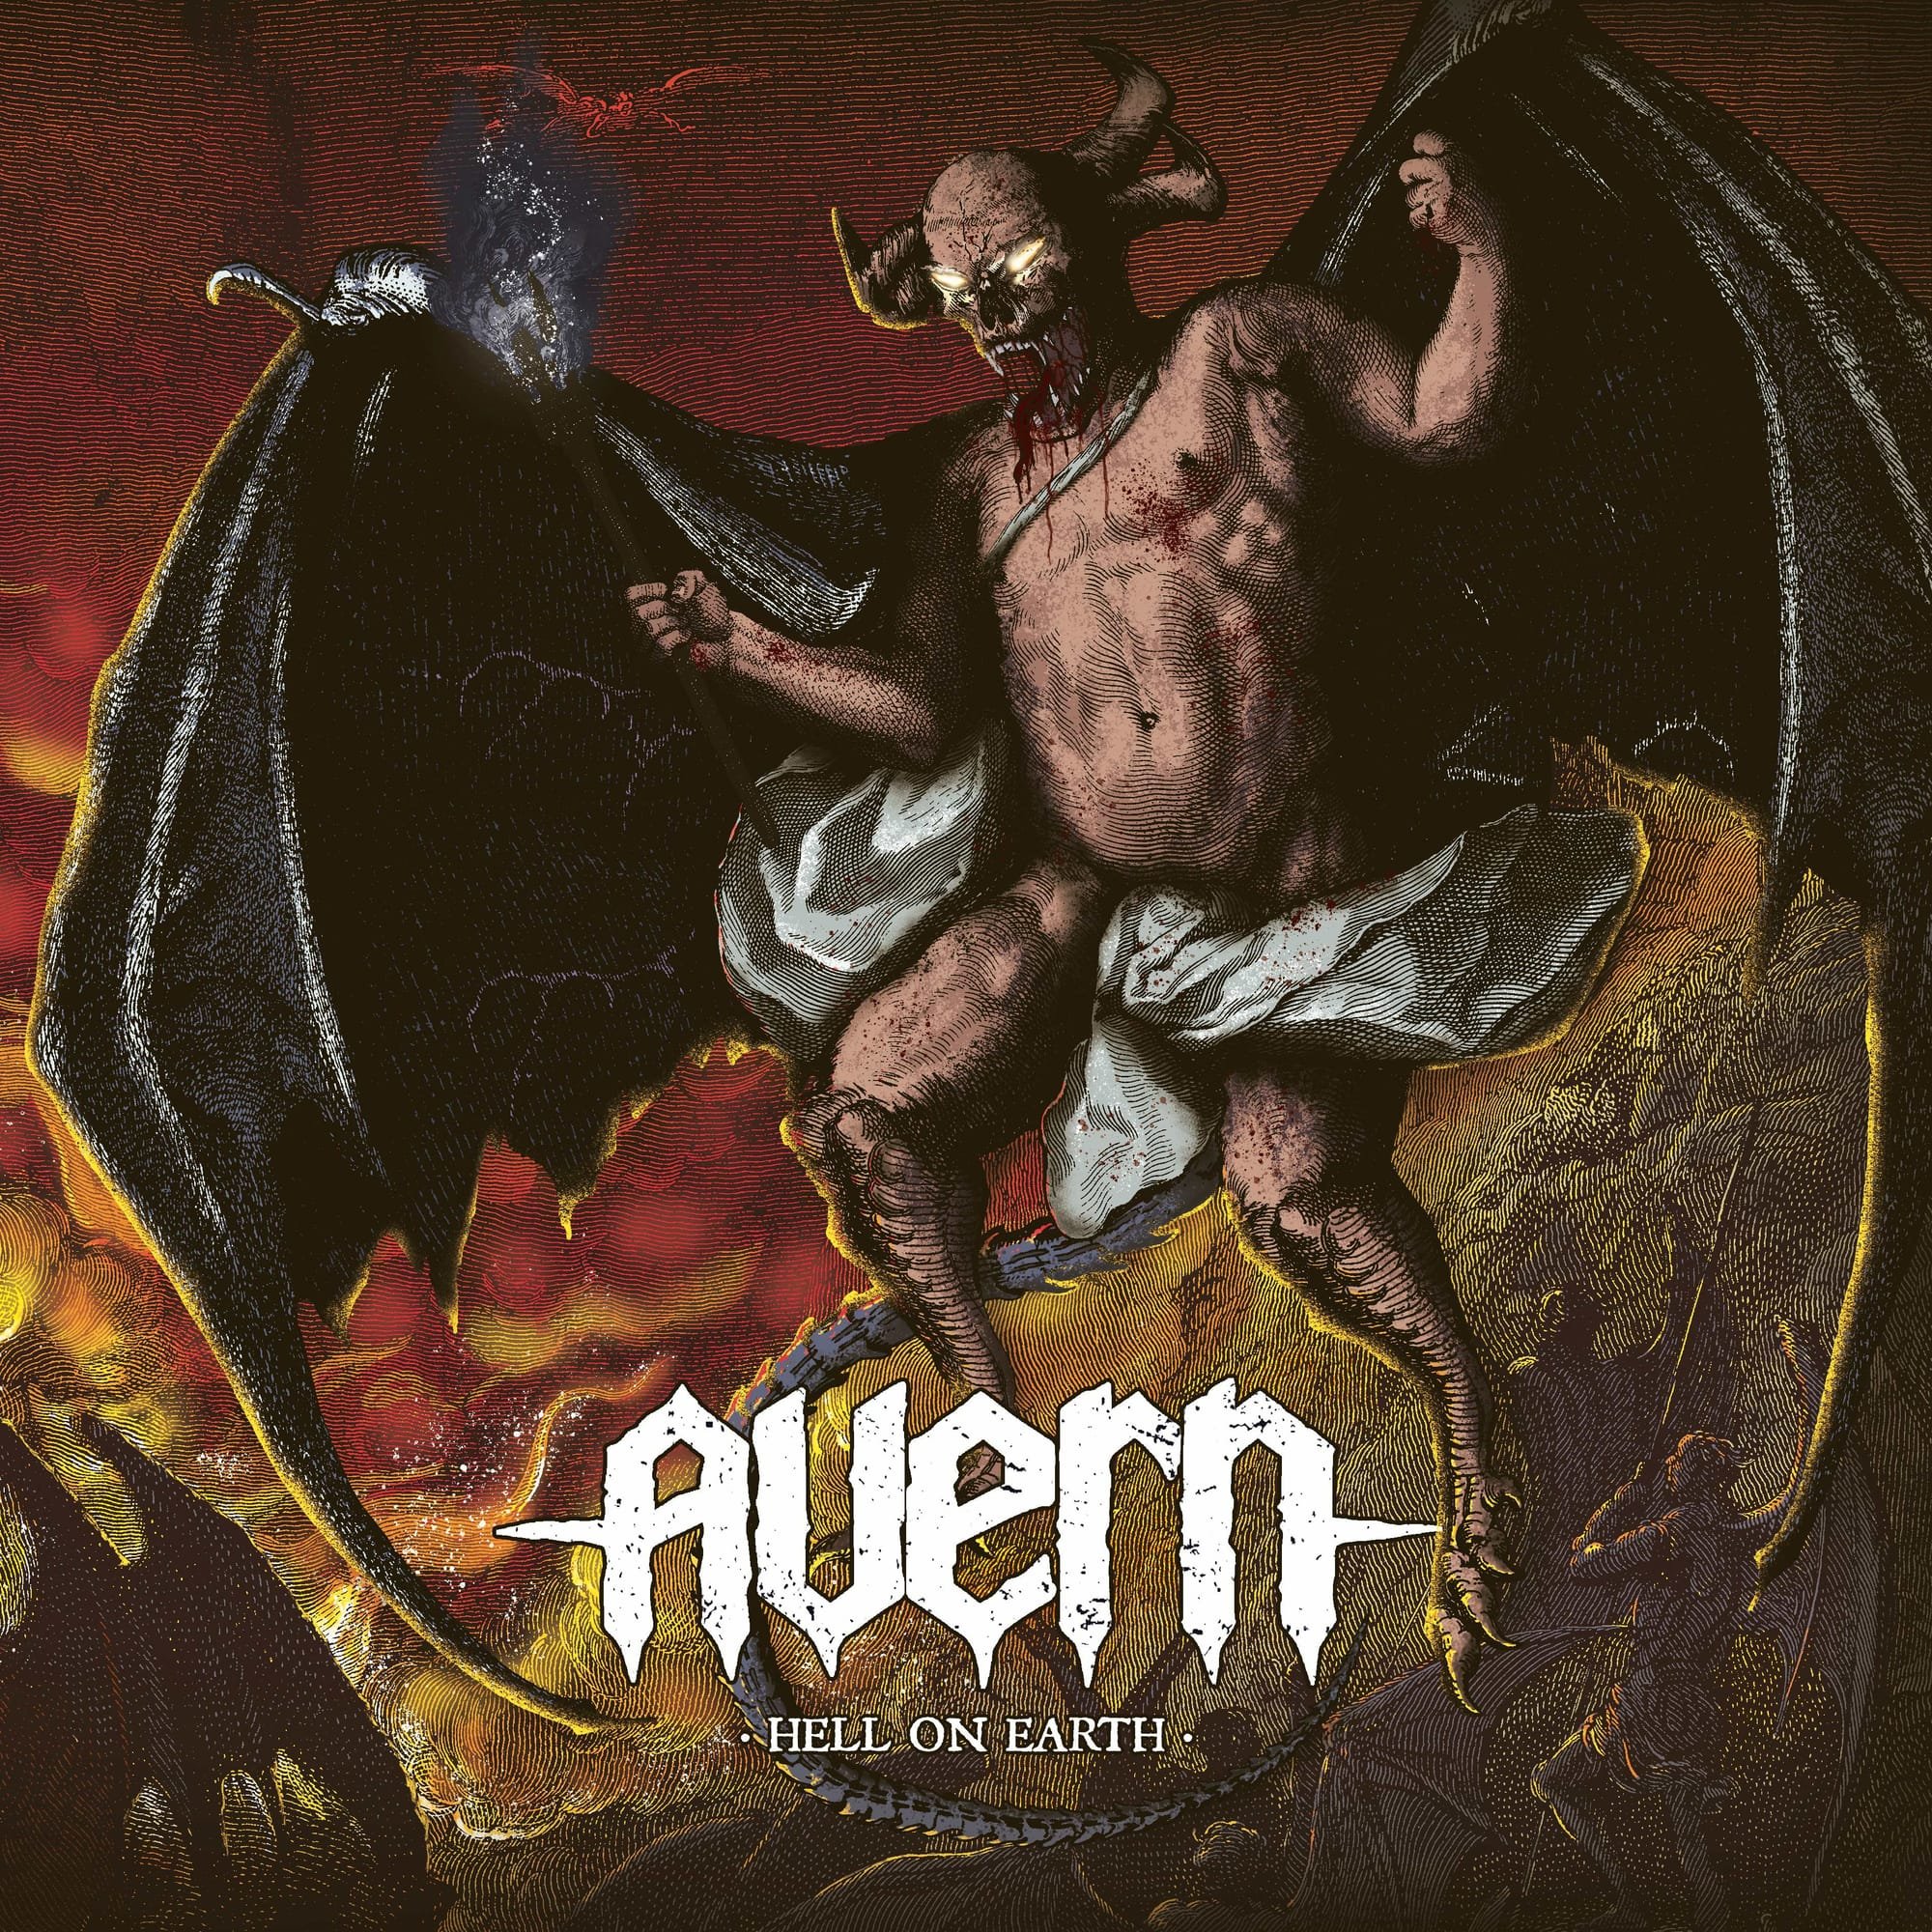 Interview with AVERN